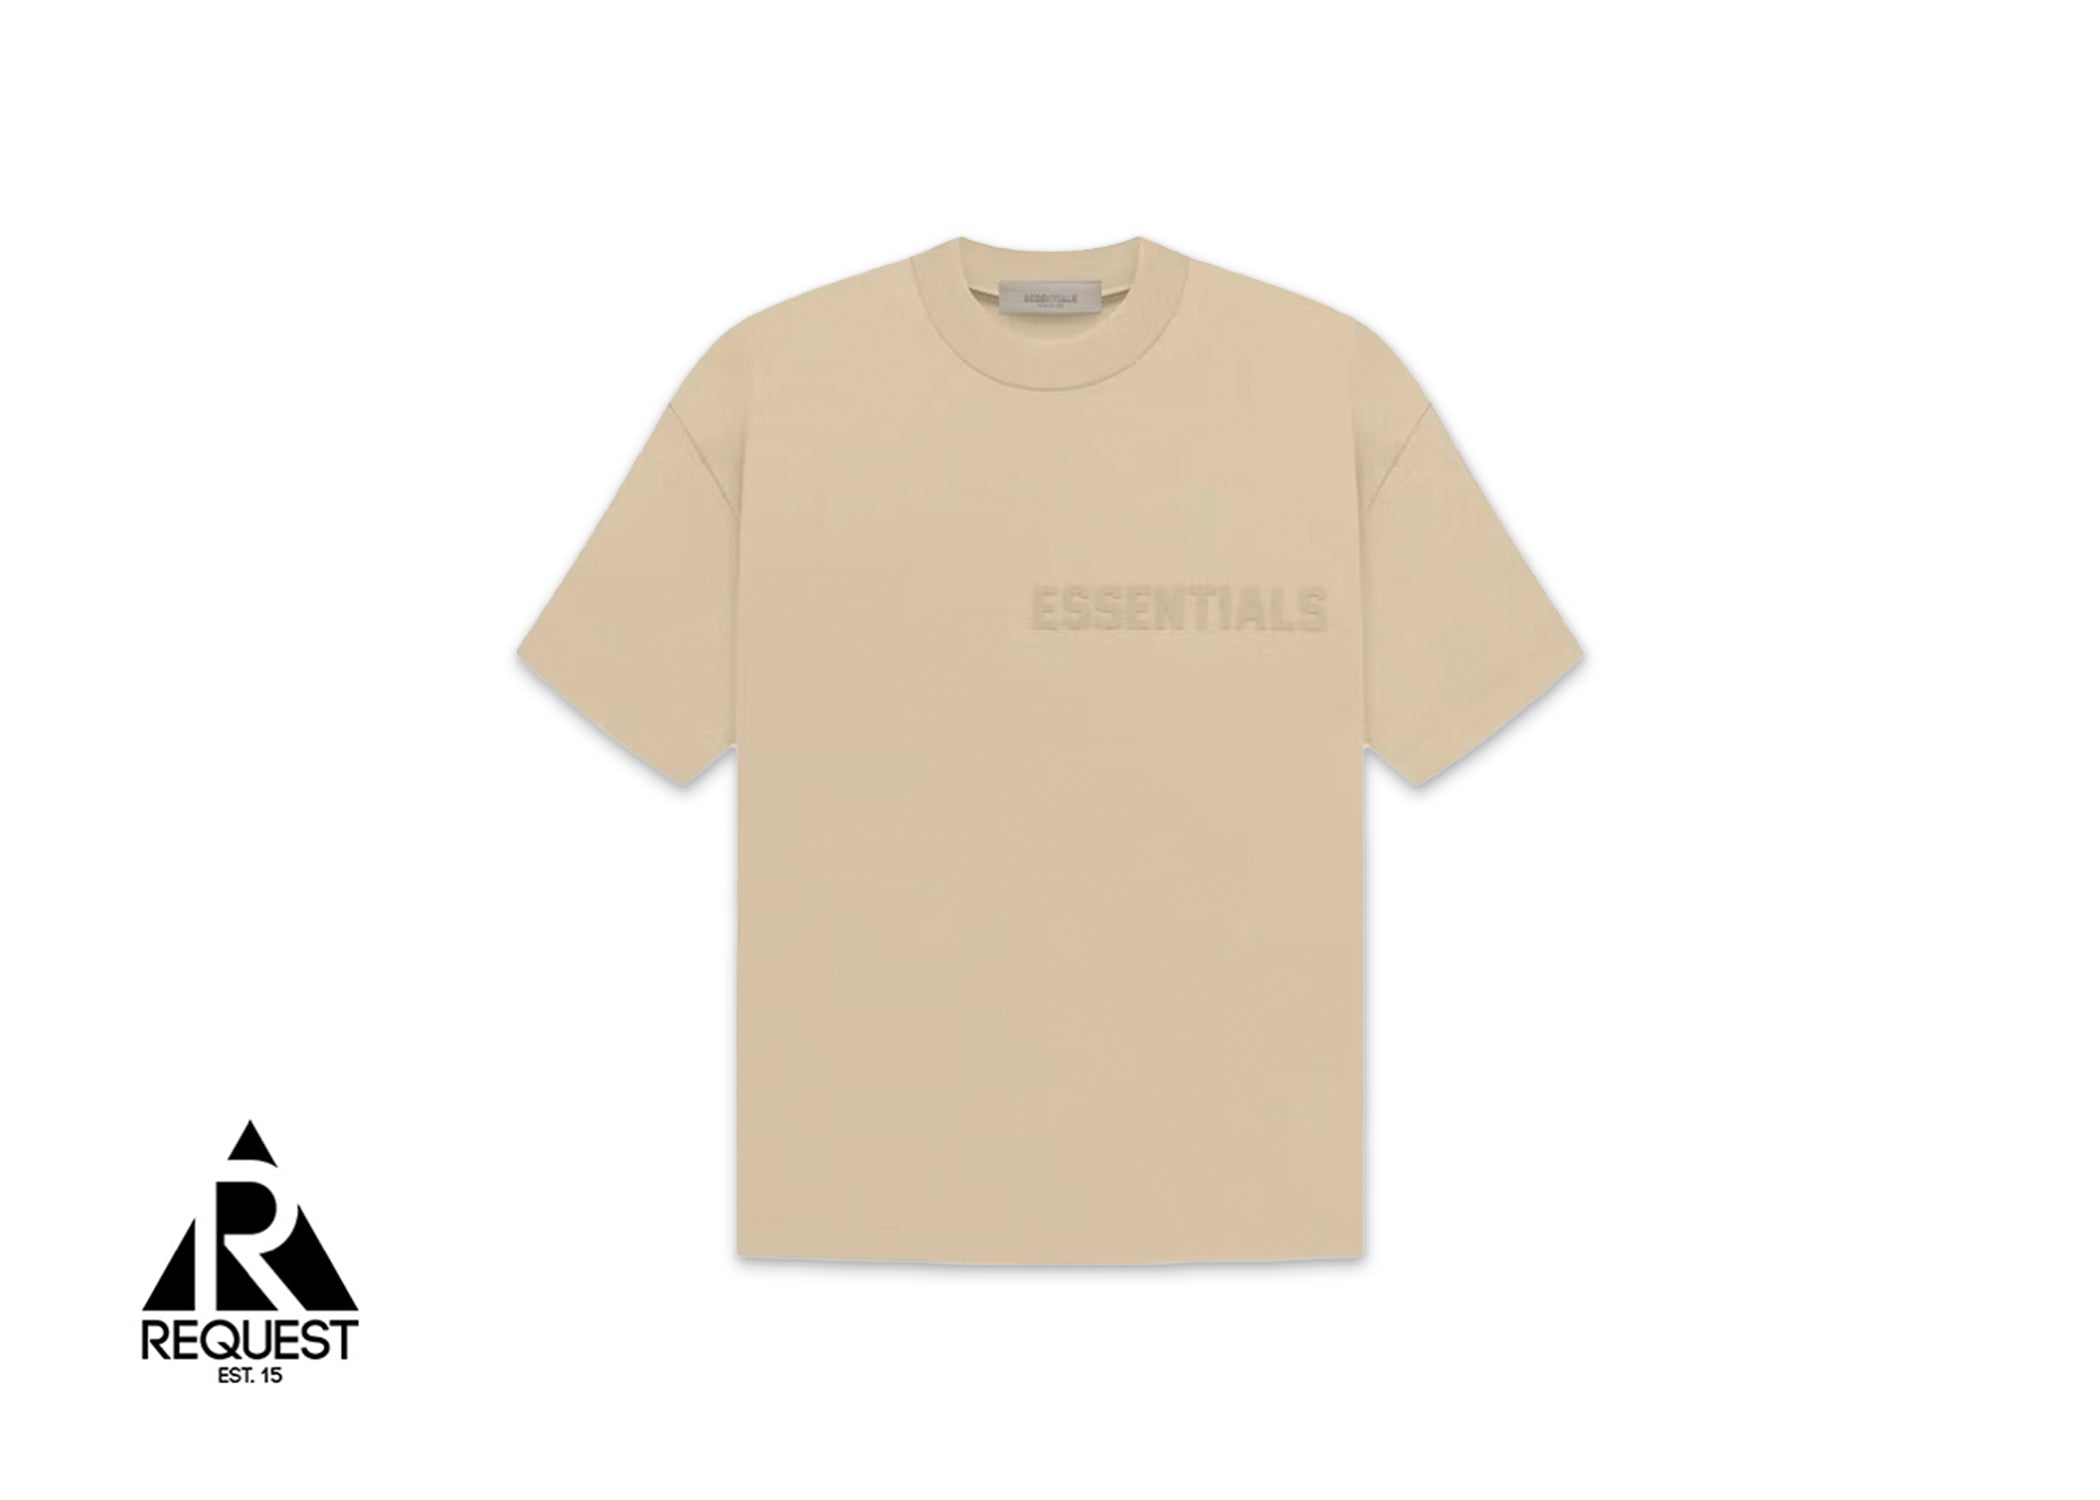 Fear of God Essentials Tee “Sand”